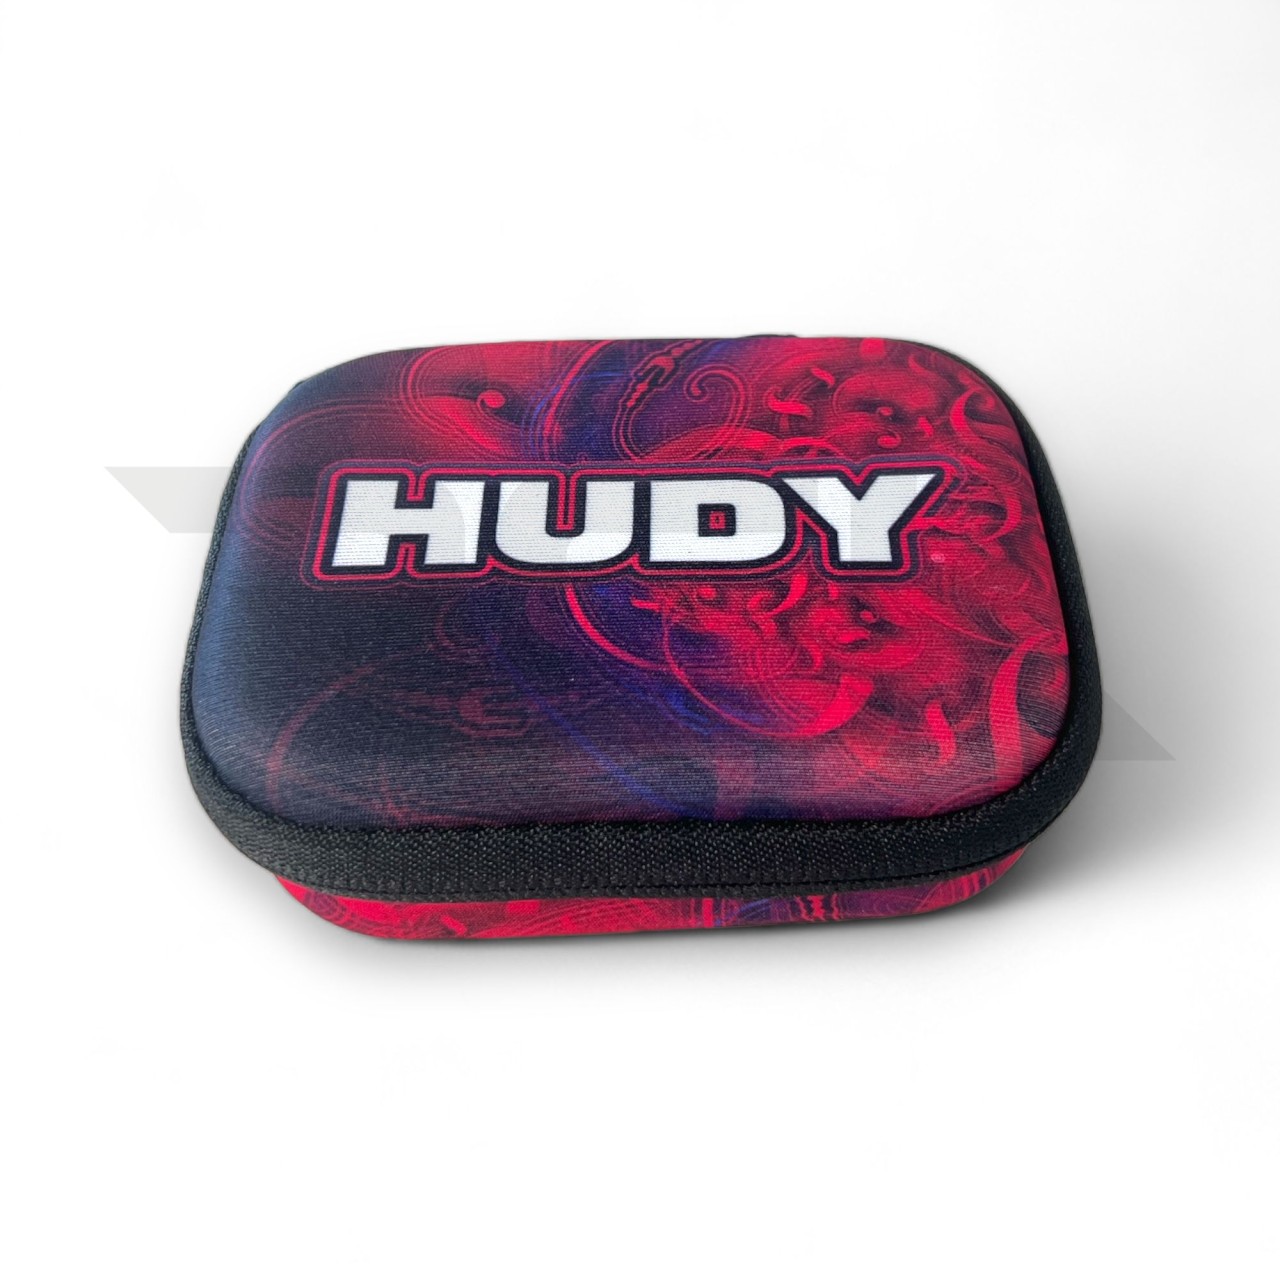 HUDY 199296-H - Hardcase Accessories Bag 120x85x46mm - Stop Watch Case